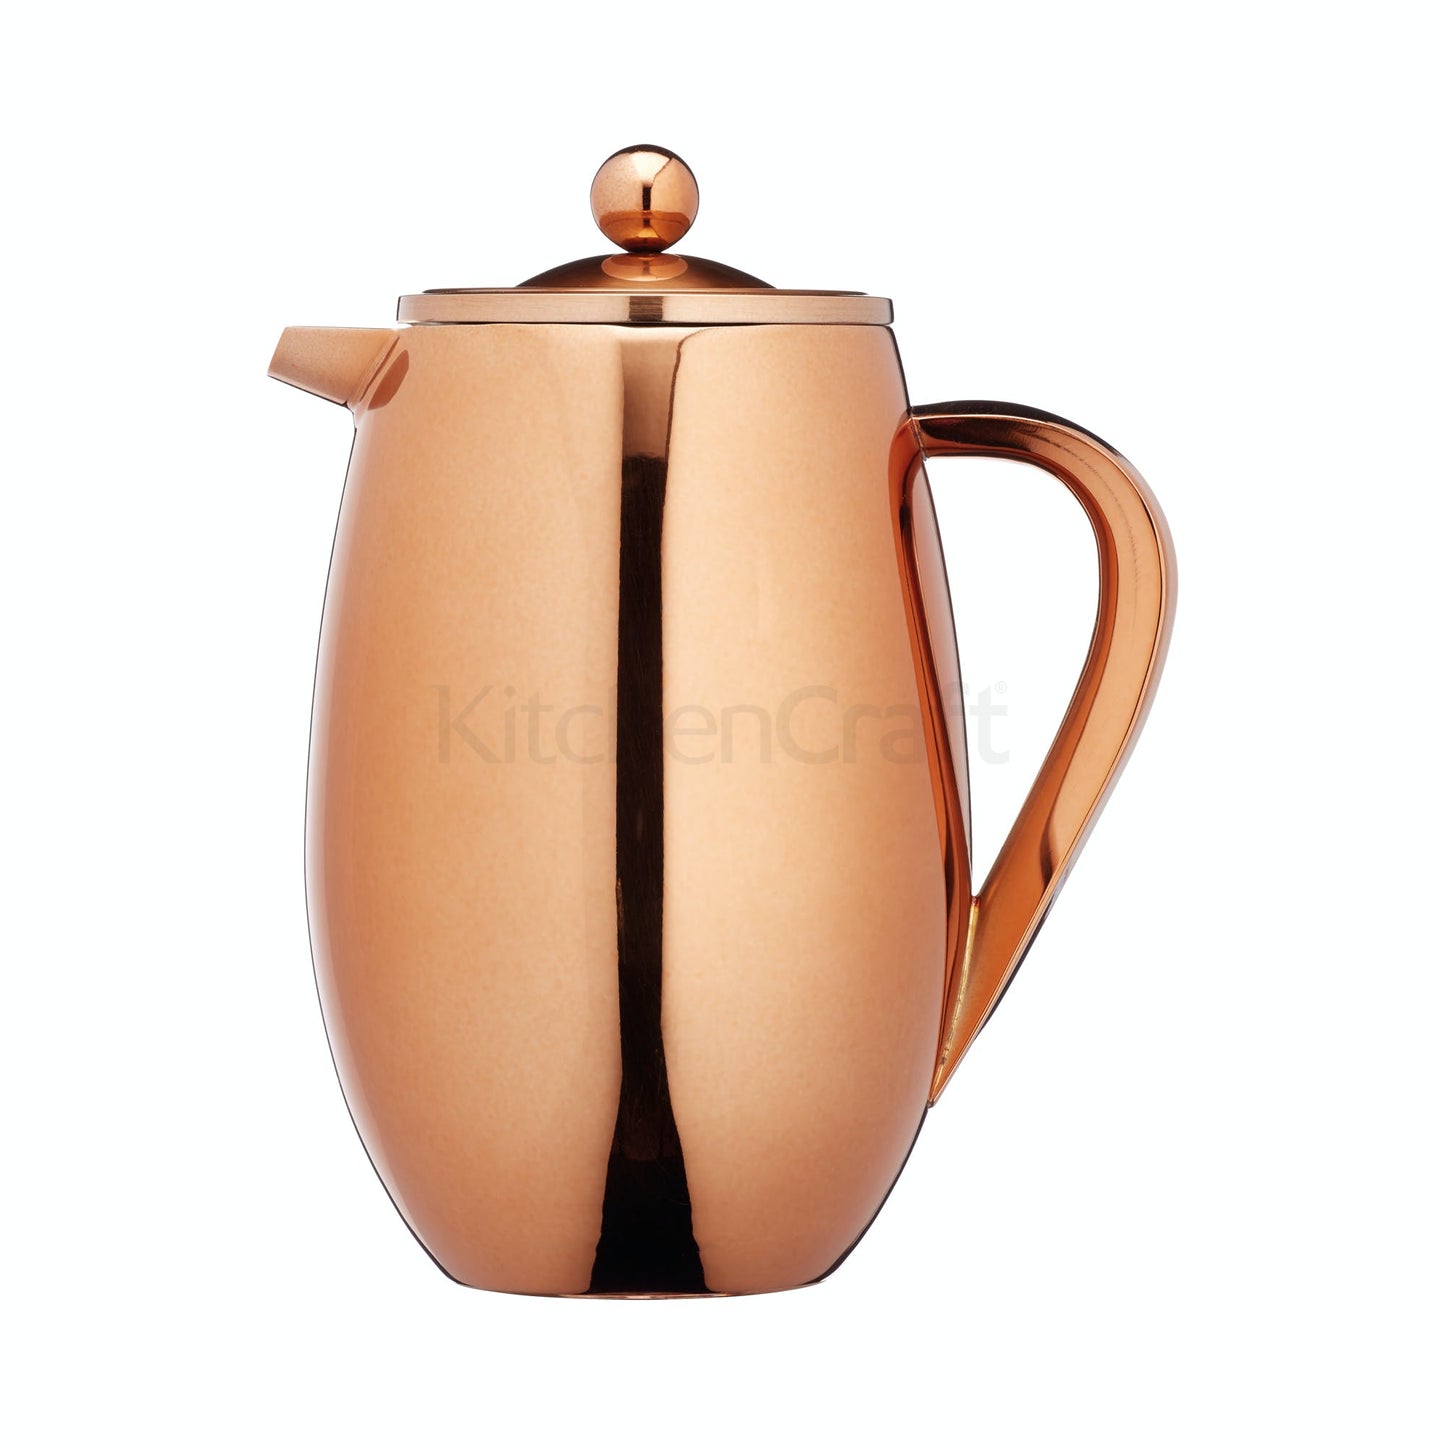 Le'Xpress Copper Finish Double Walled Insulated Cafetiere 1L